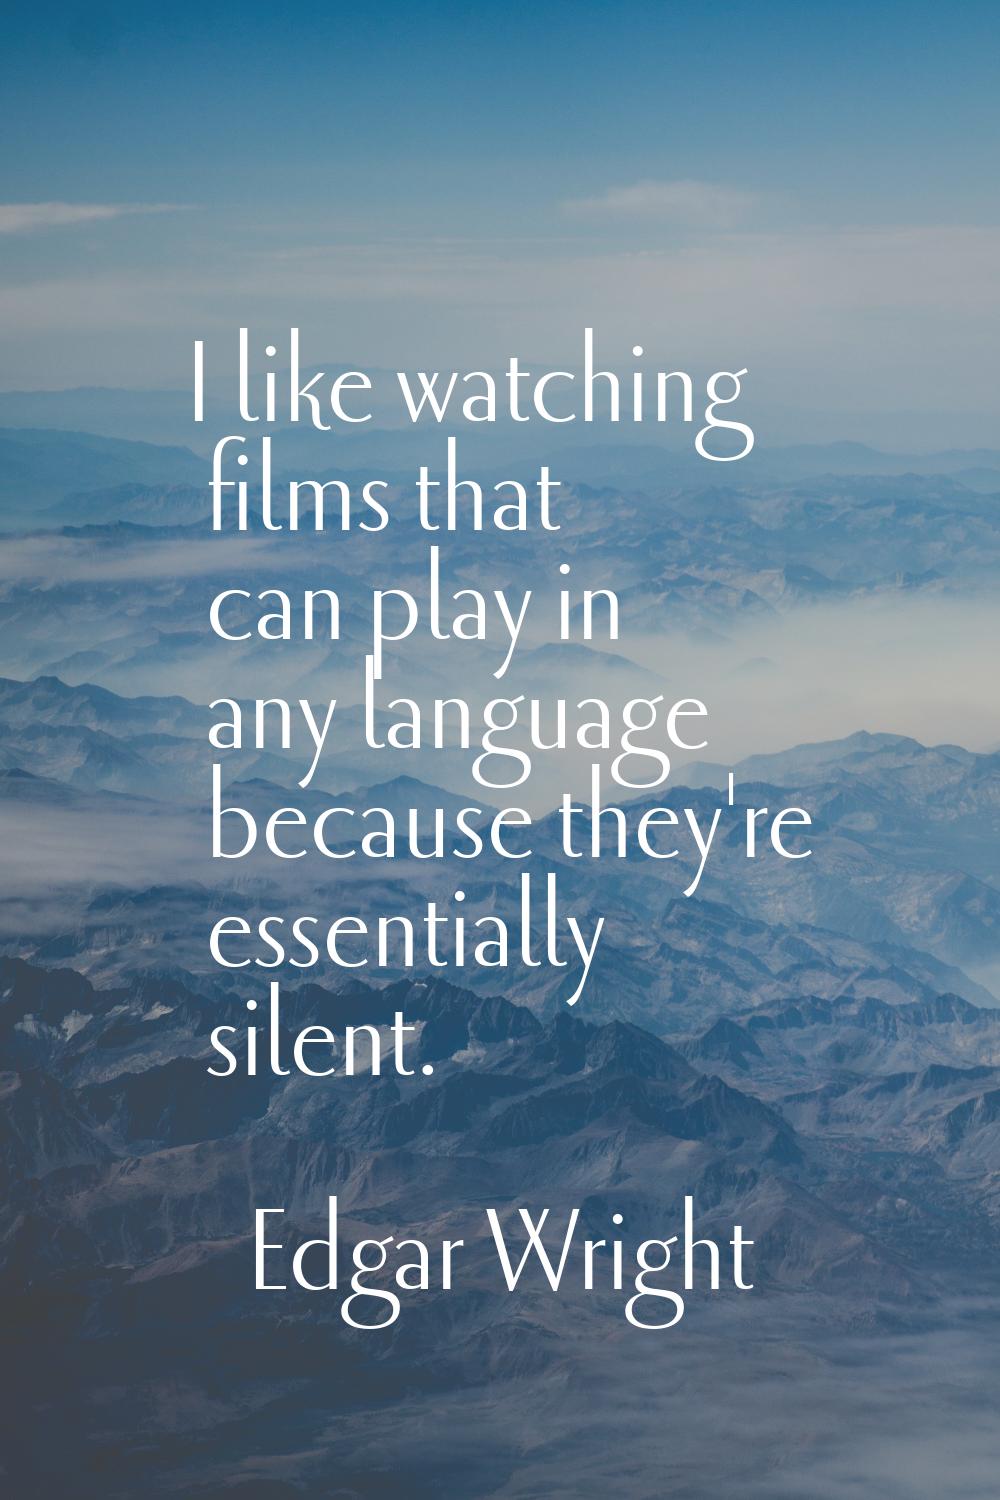 I like watching films that can play in any language because they're essentially silent.